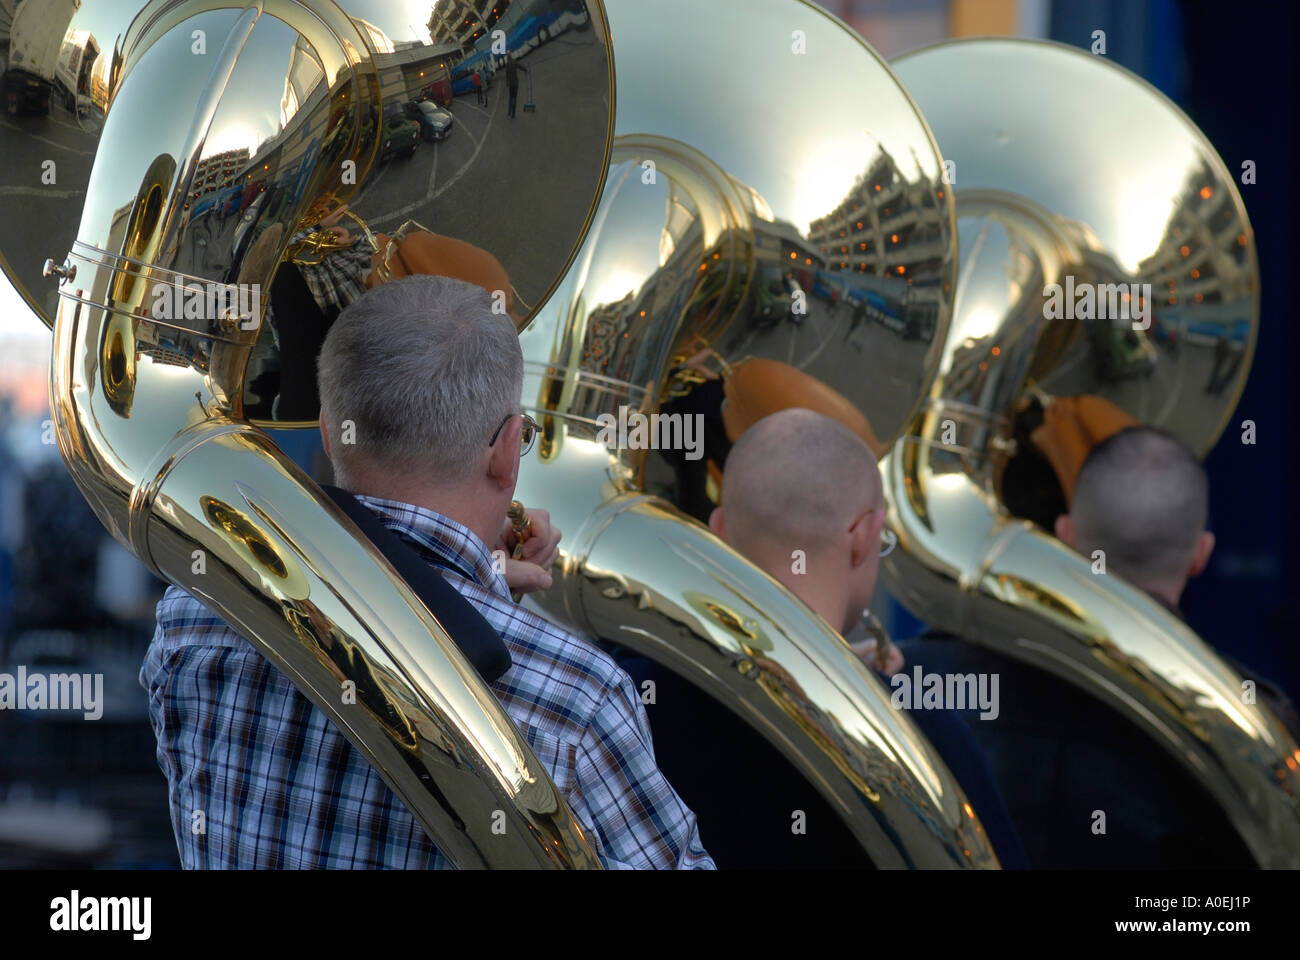 Sousaphone players with the American Army in Europe Marching Band 2006 Stock Photo